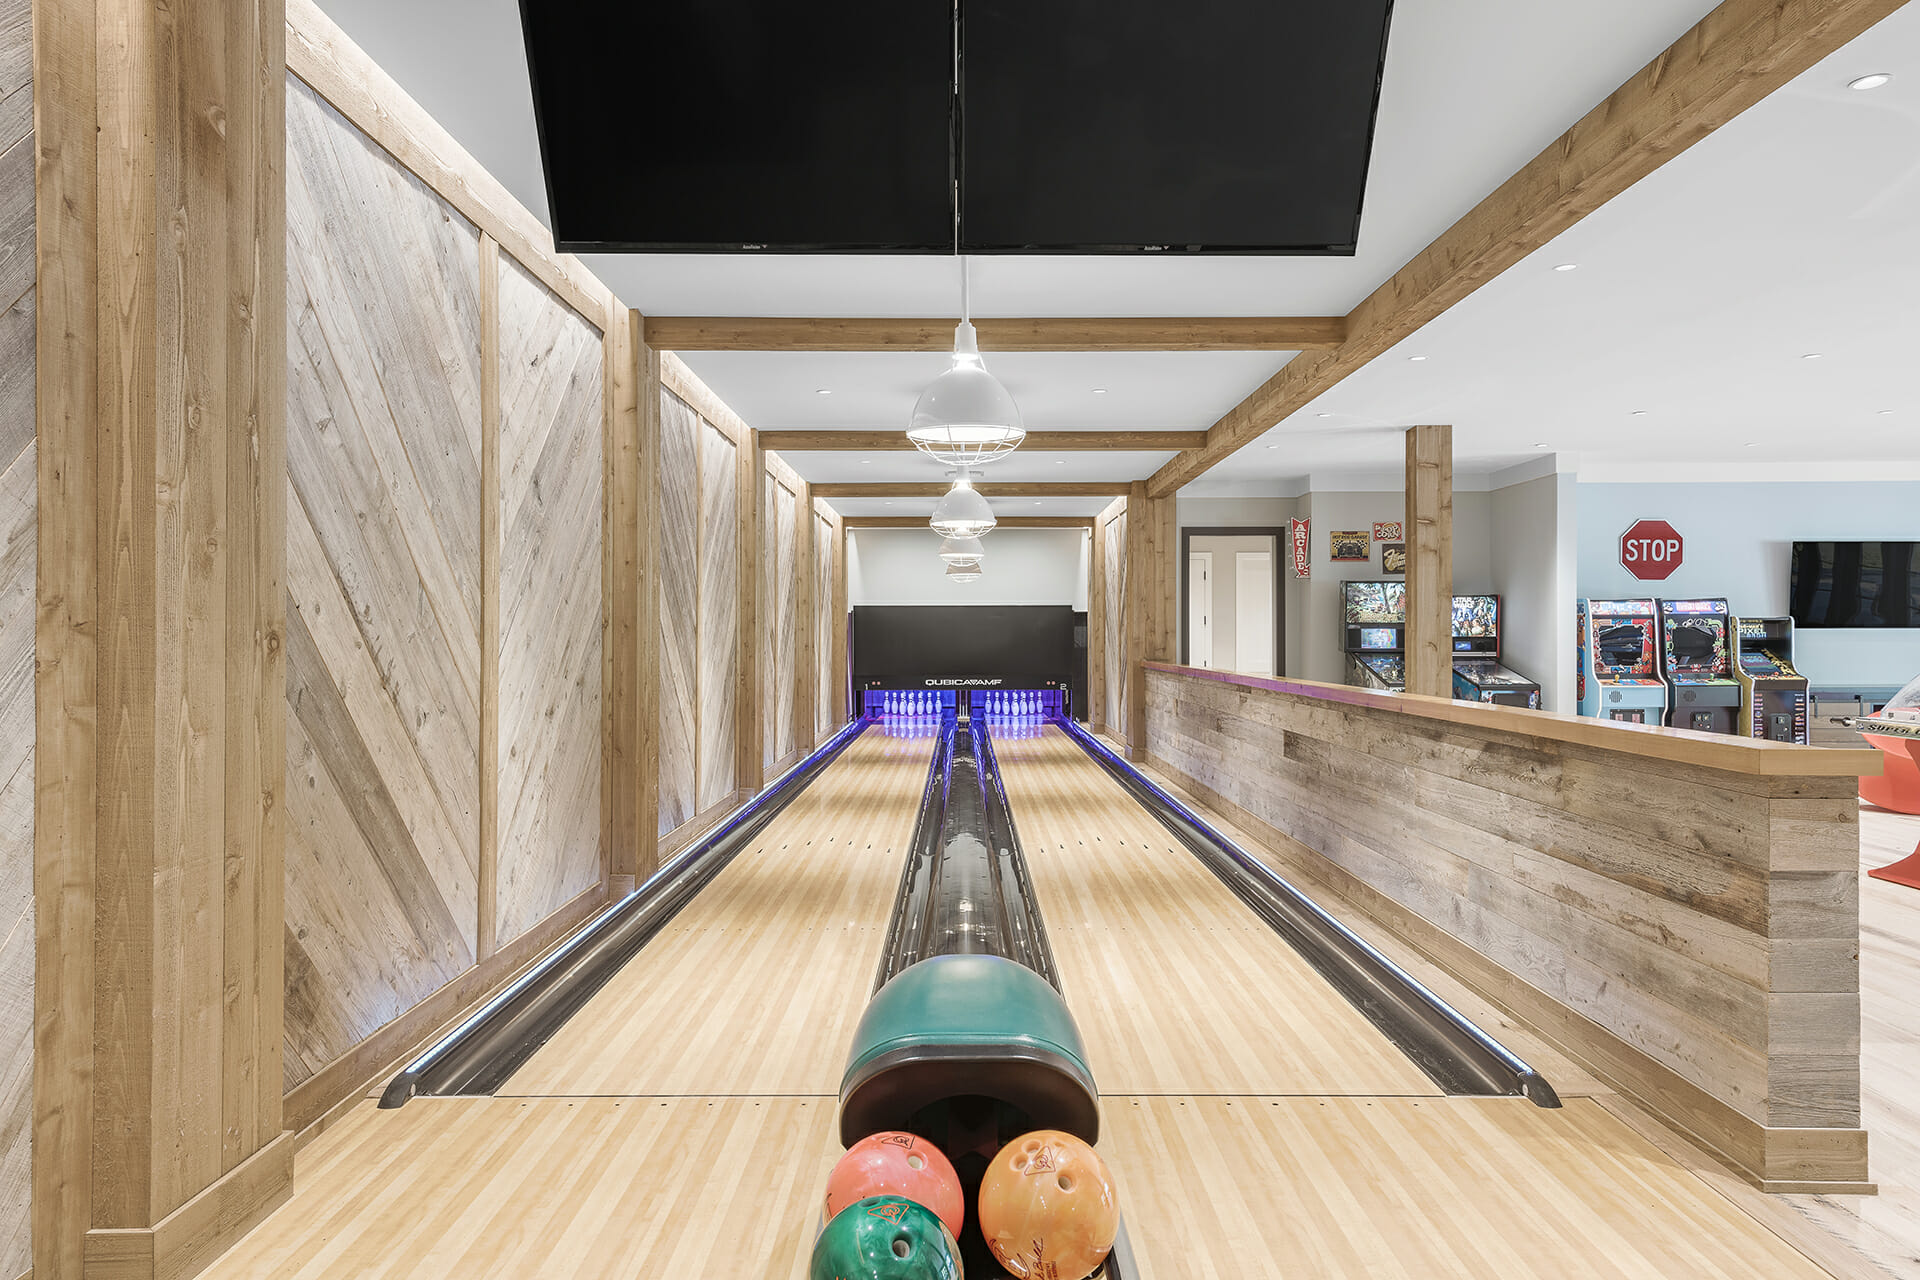 Activity Room_Bowling Alley_HDR_edit_2_1